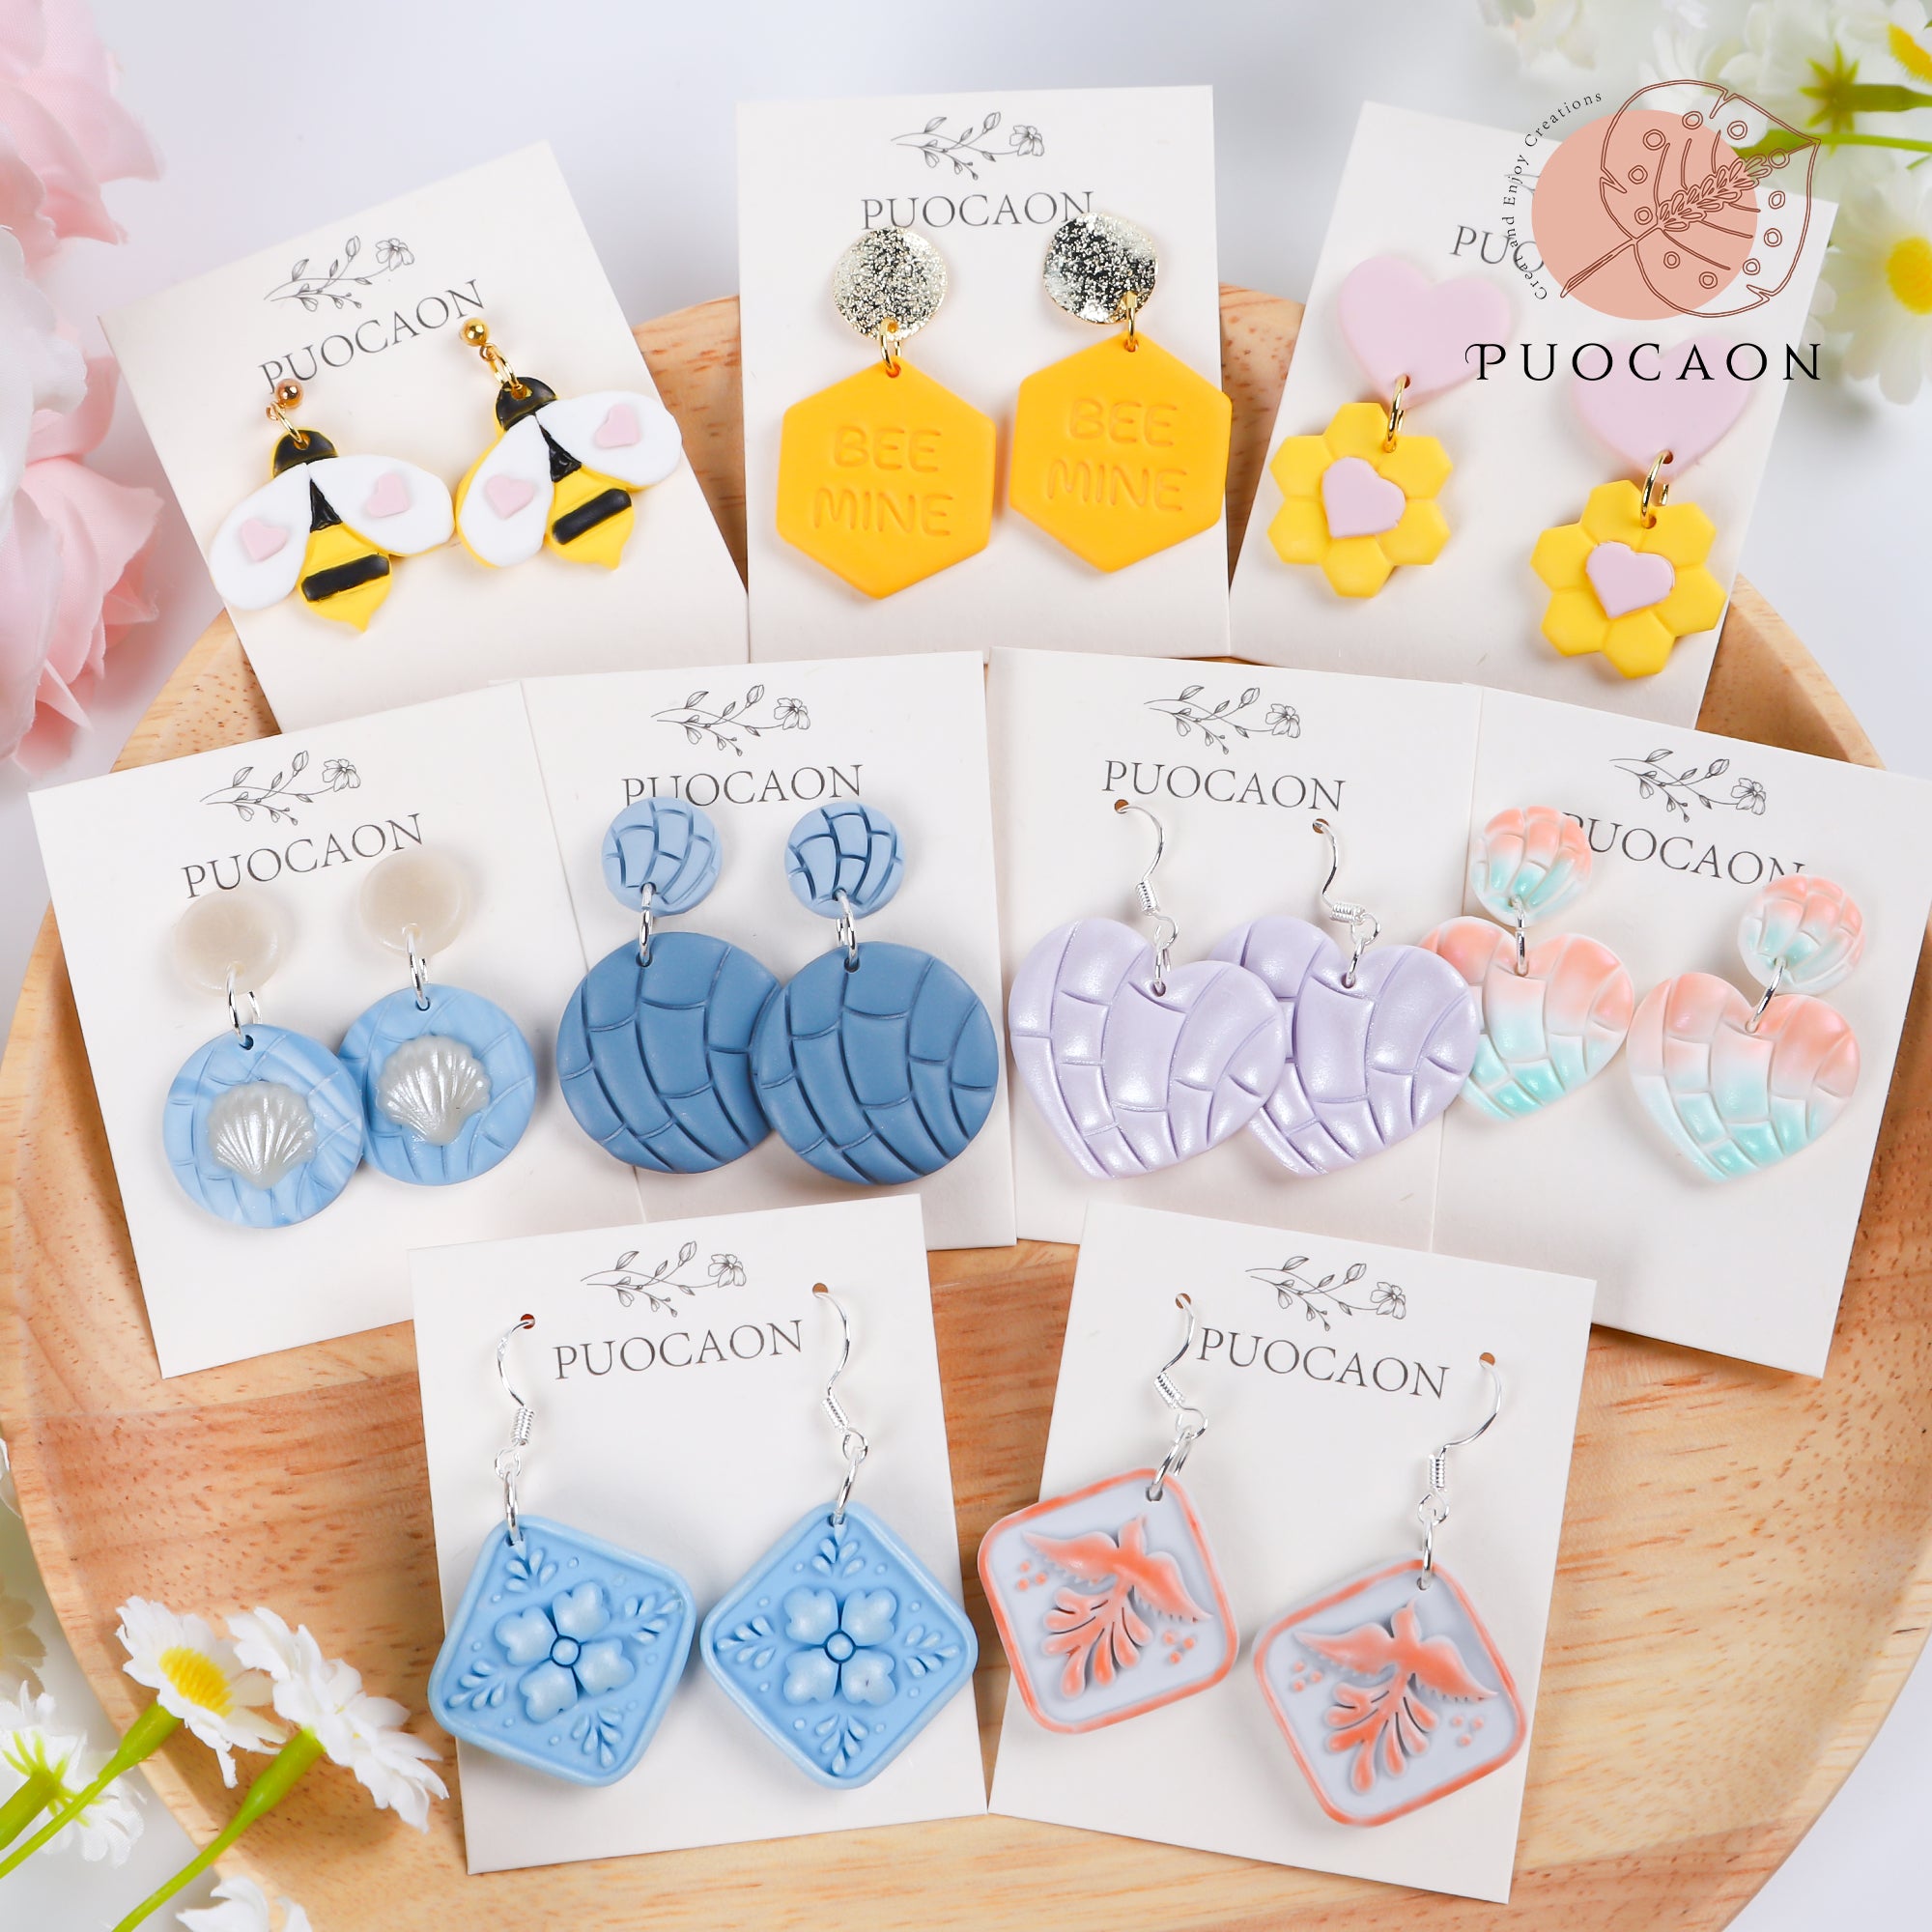 Puocaon Tile Polymer Clay Cutters 4 Pcs